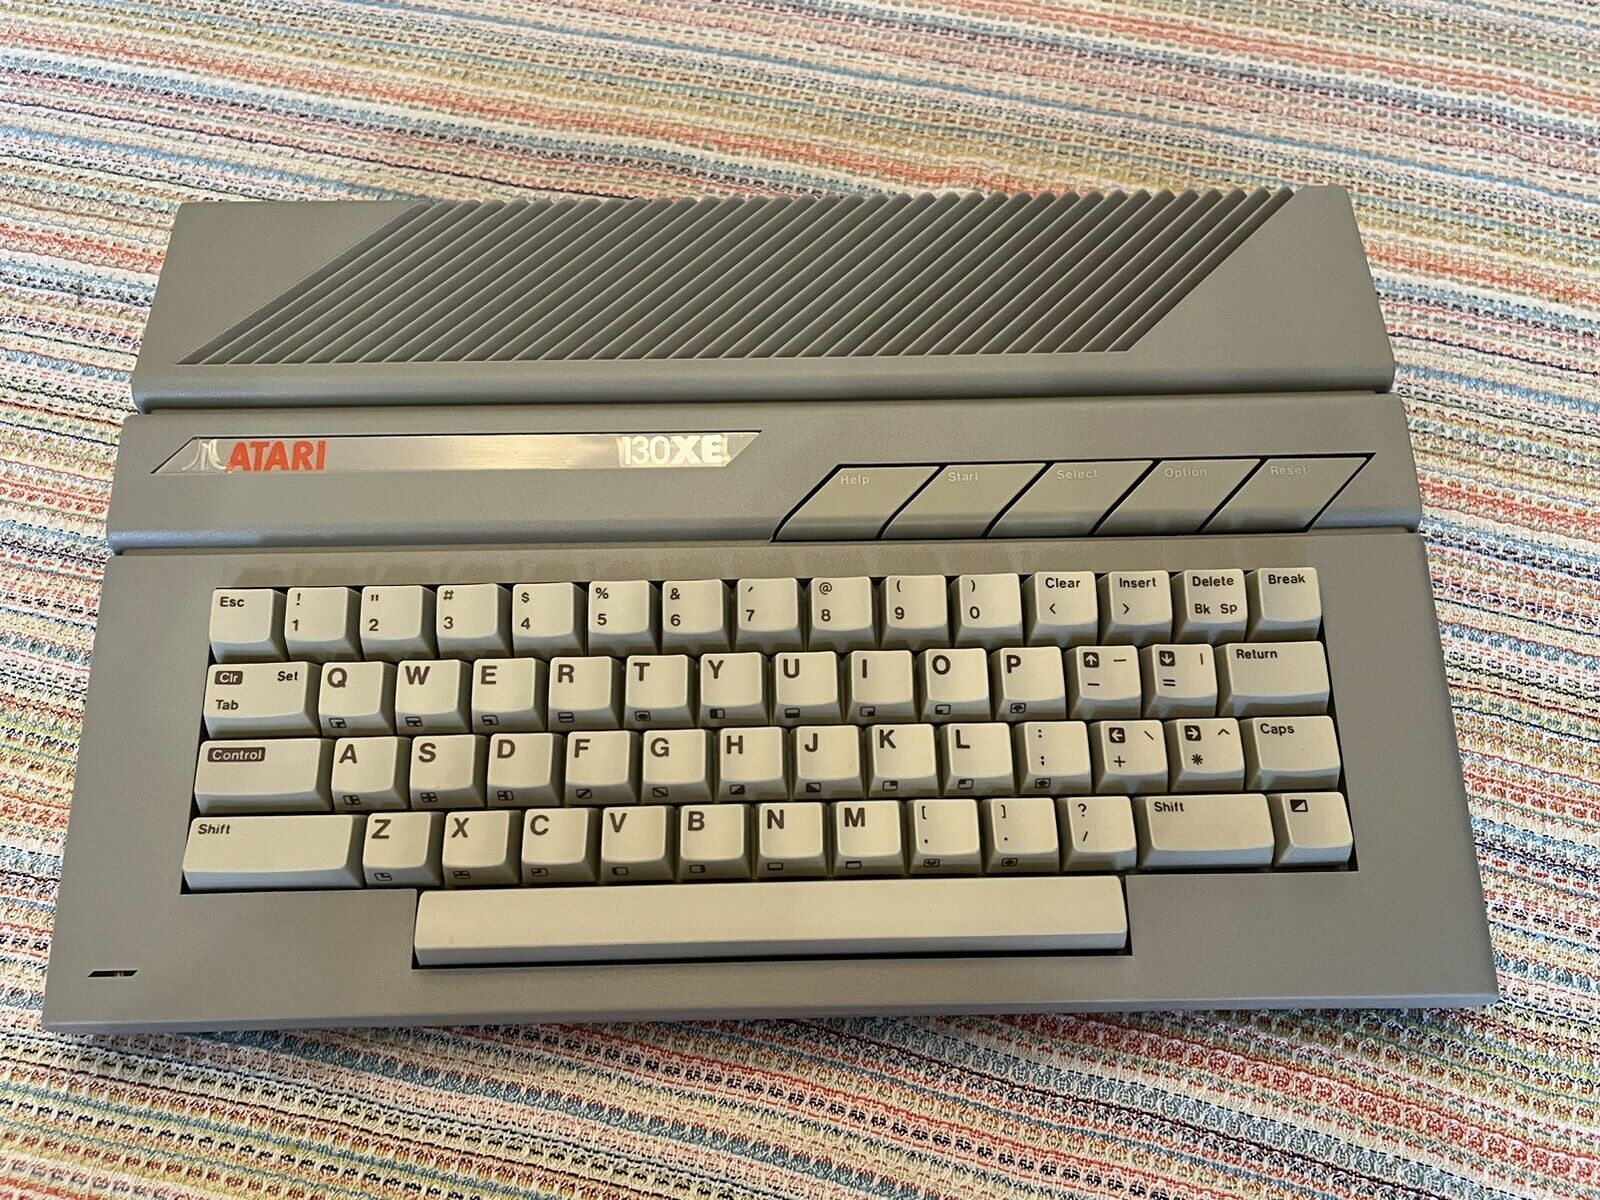 Atari 130XE 8-bit Computer - Tested - No Power Cord Or Accessories